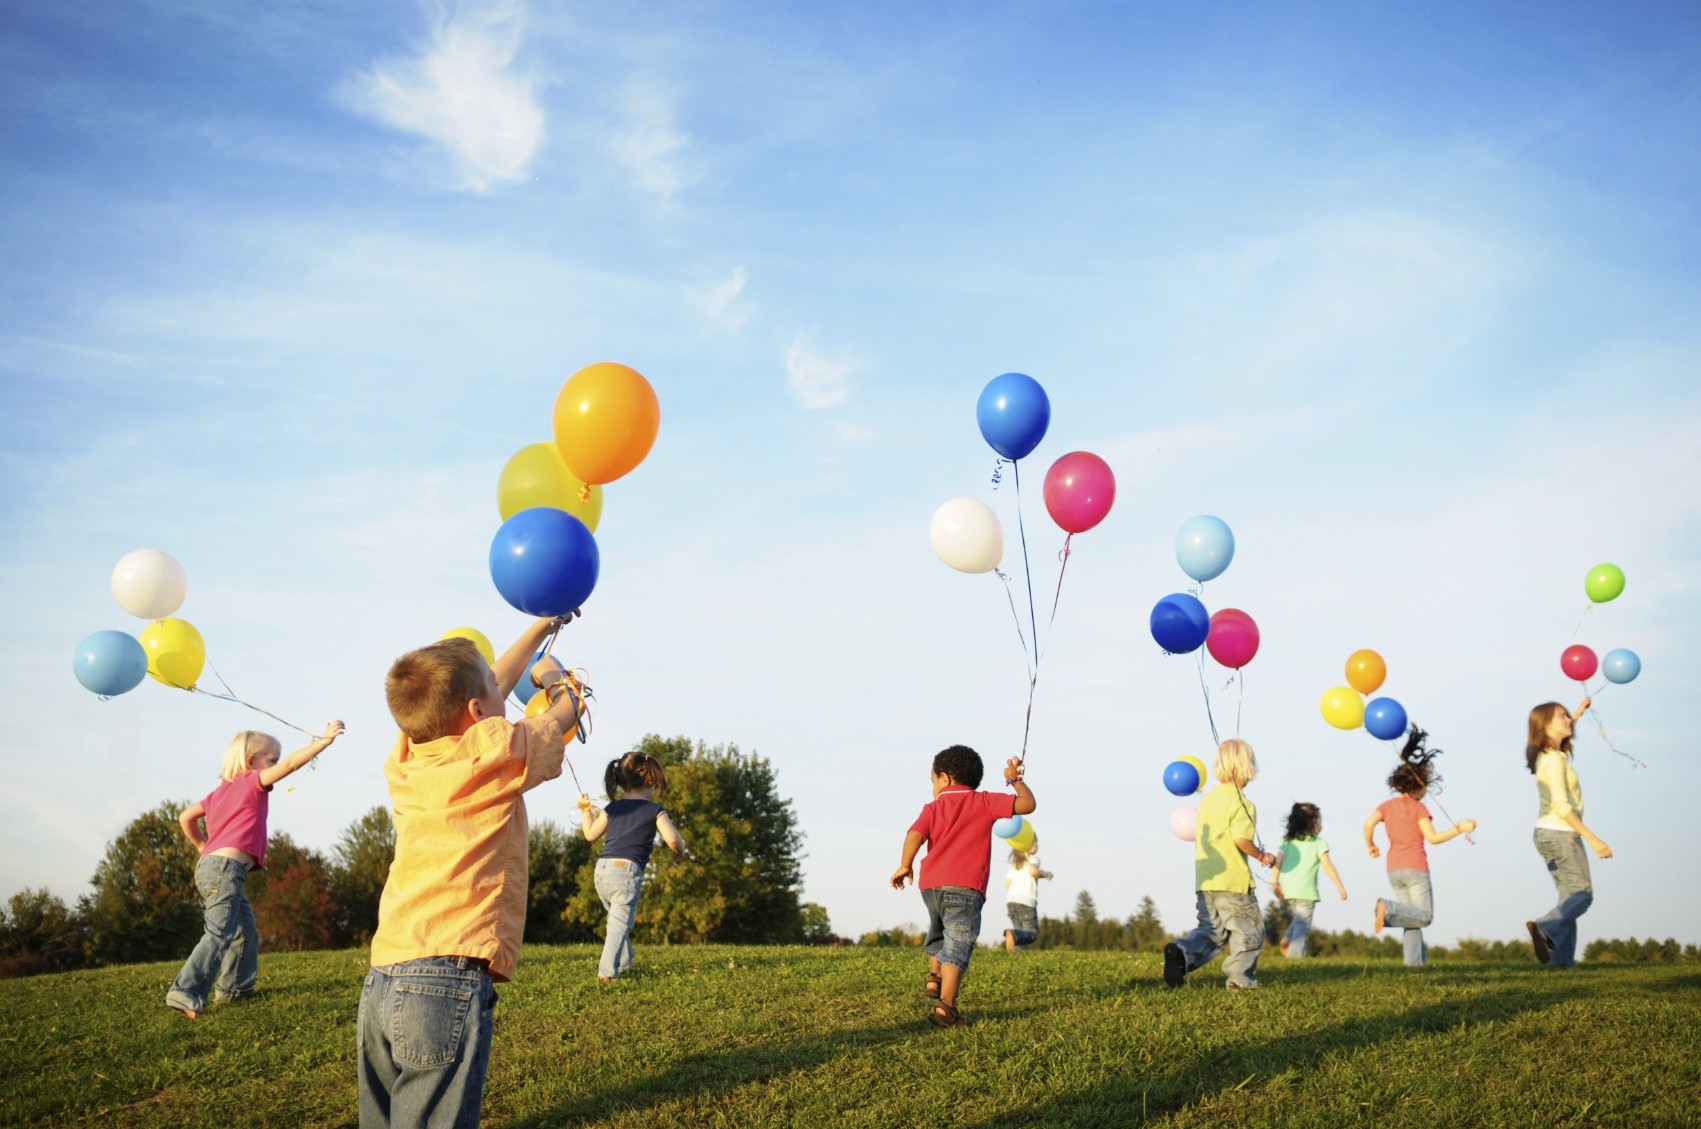 children-playing-with-balloons-images.jpg